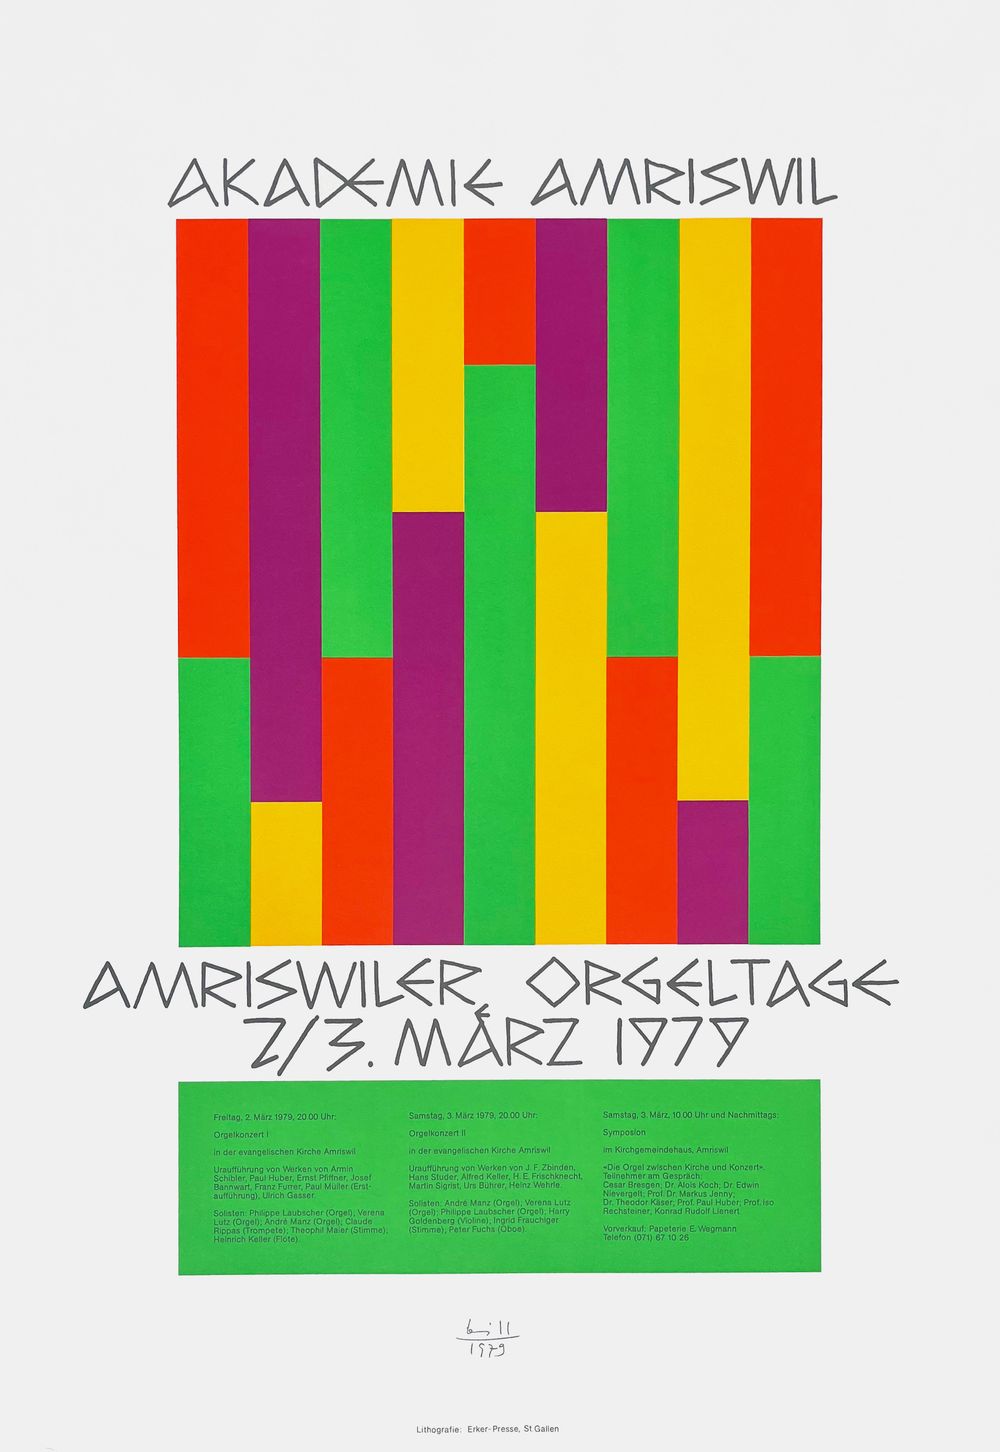 Expo 79 - Amriswiler Orgeltage